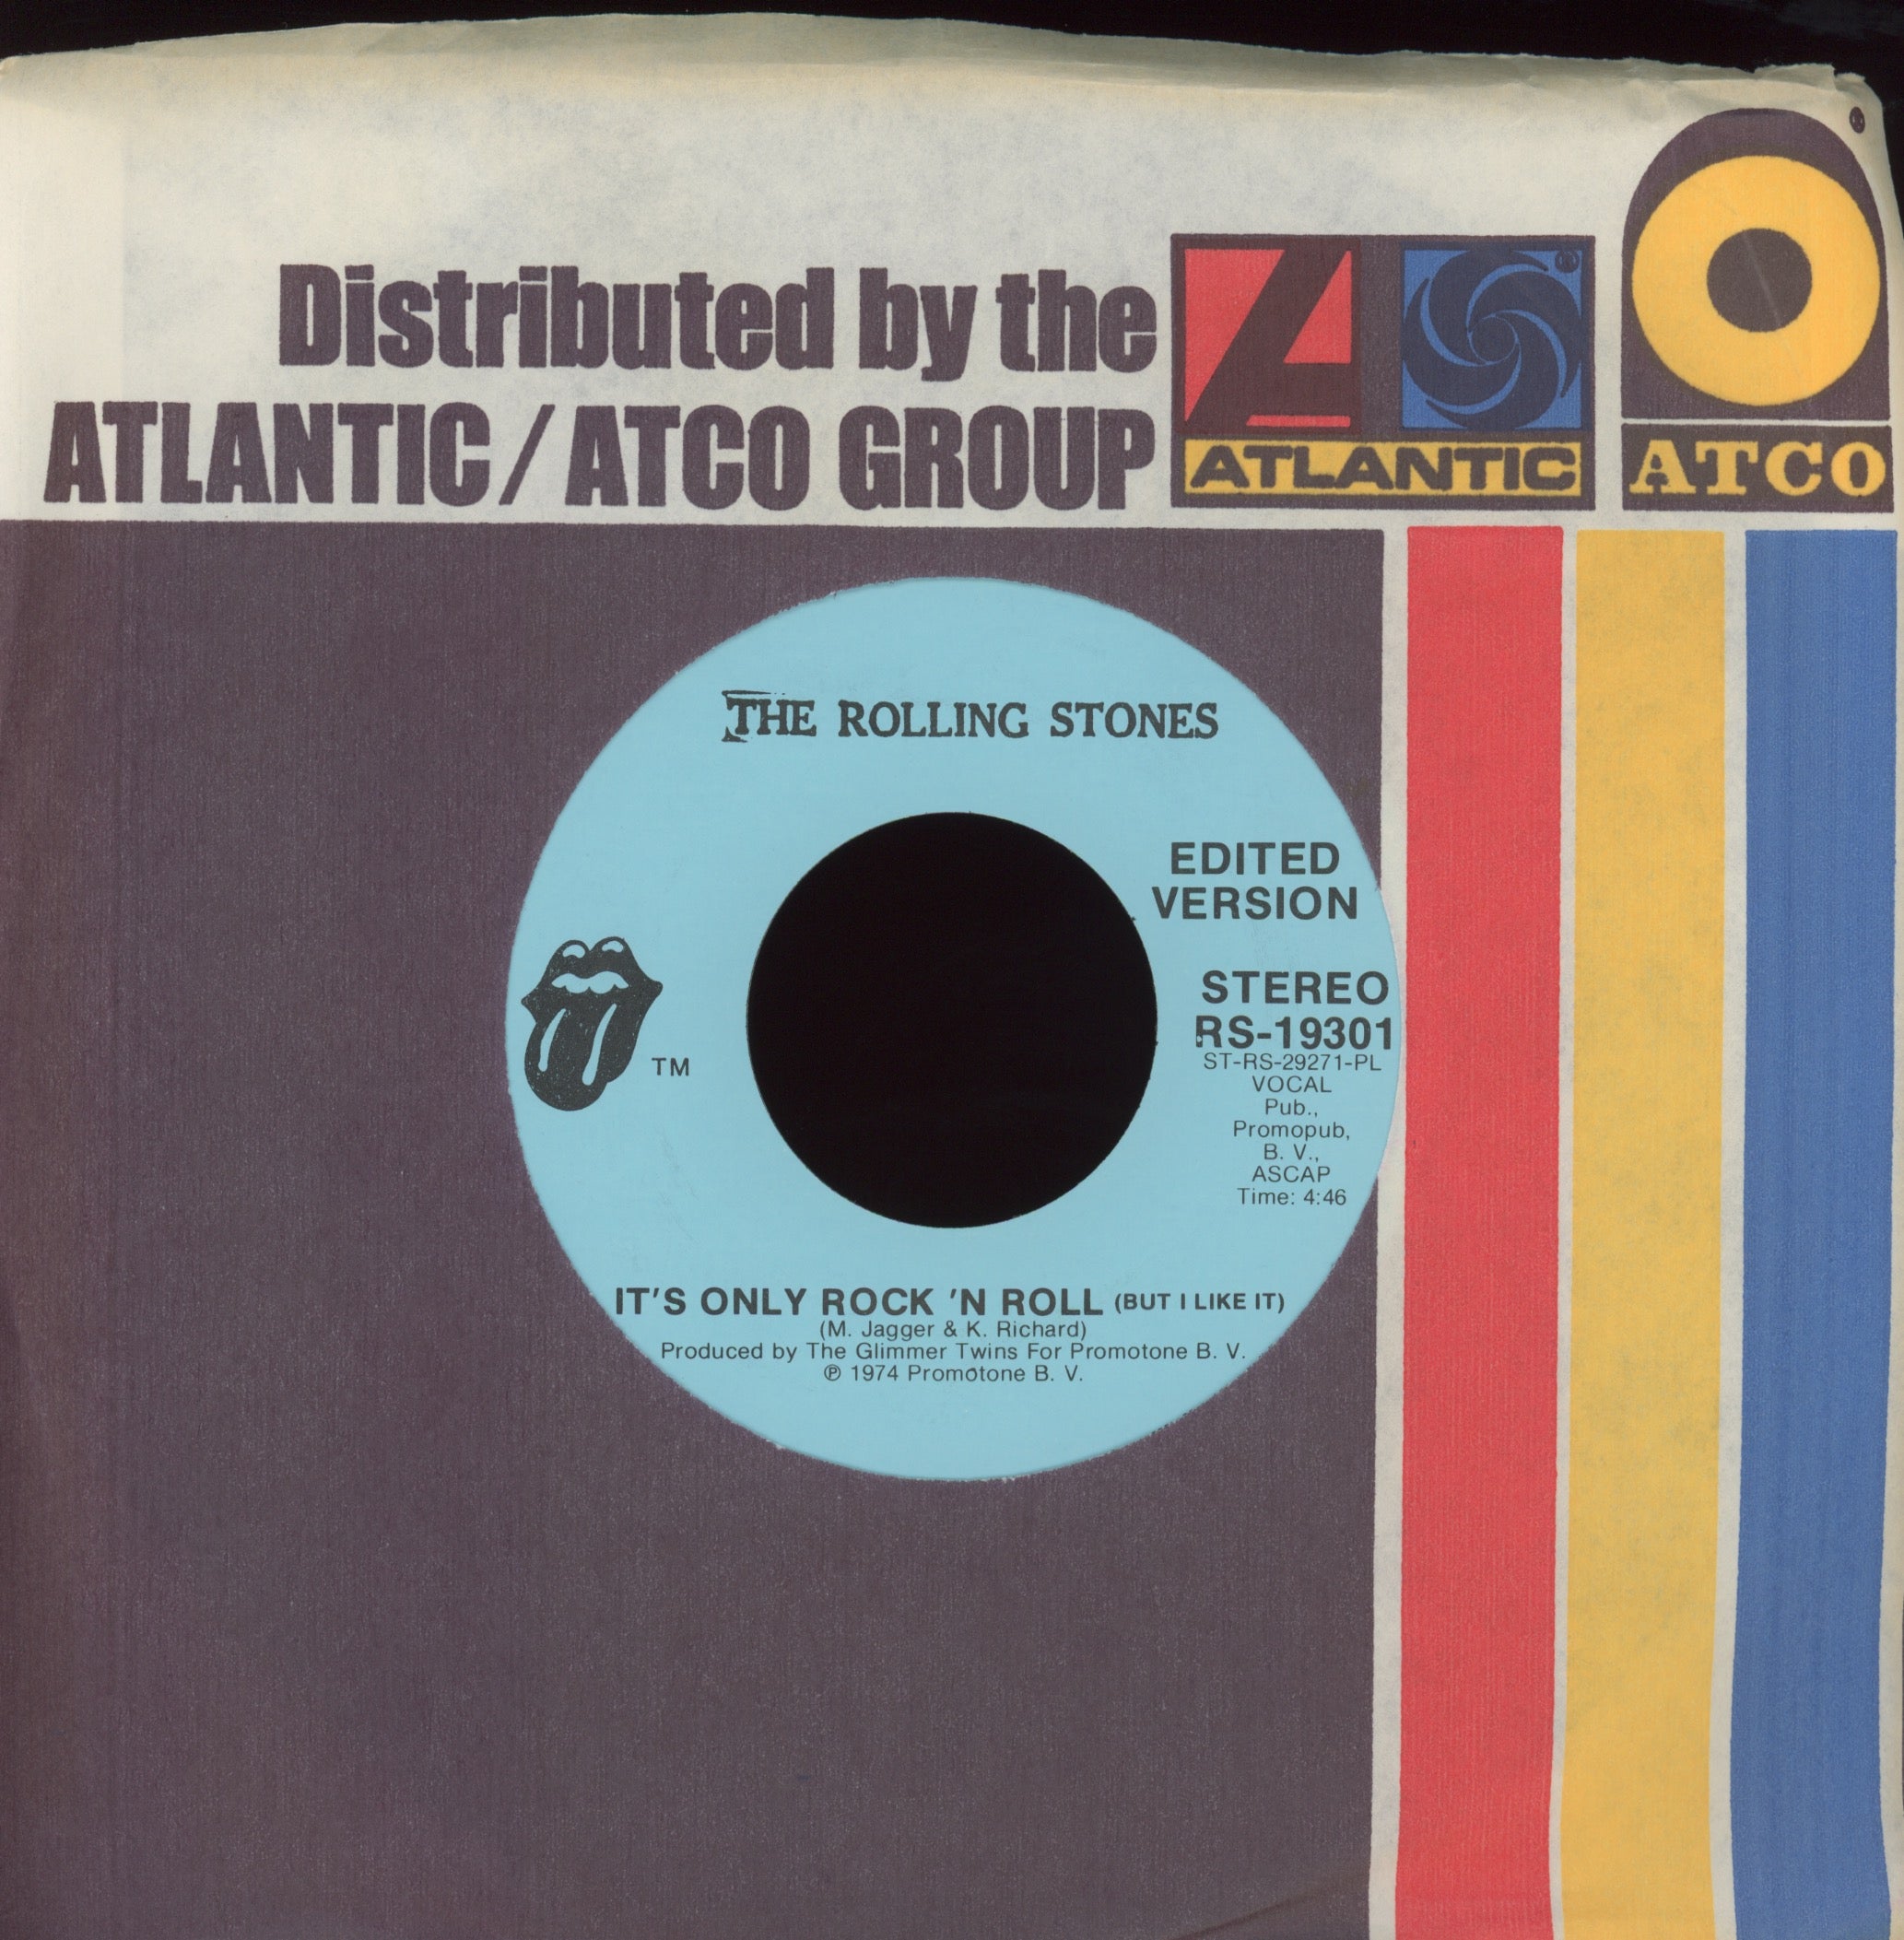 The Rolling Stones - It's Only Rock 'N Roll (But I Like It) on Rolling Stones Records Promo